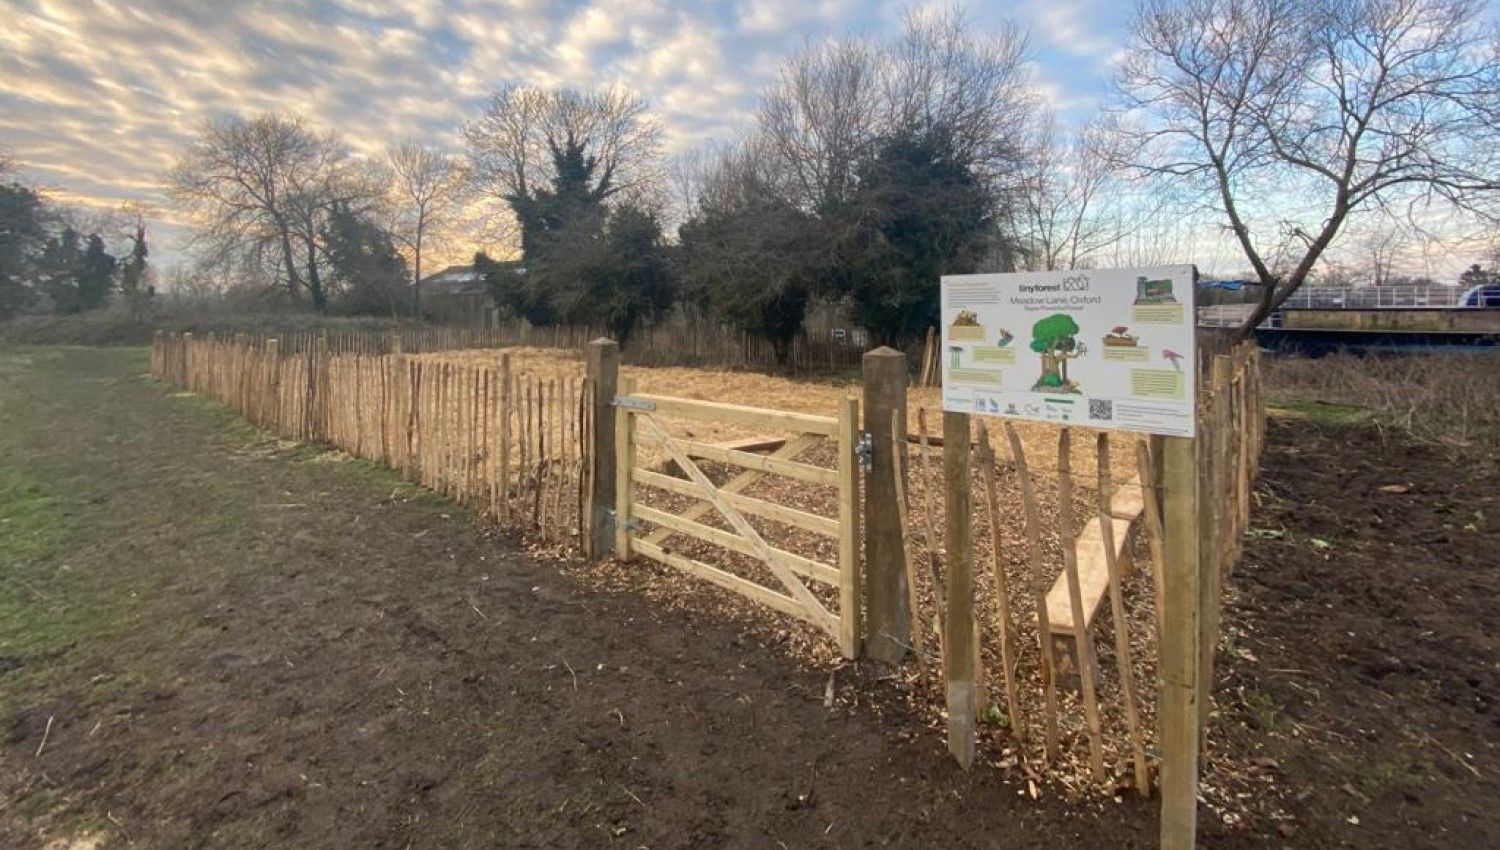 February 2021: The Tiny Forest at Meadow Lane is planted (Photo credit Earthwatch Europe)